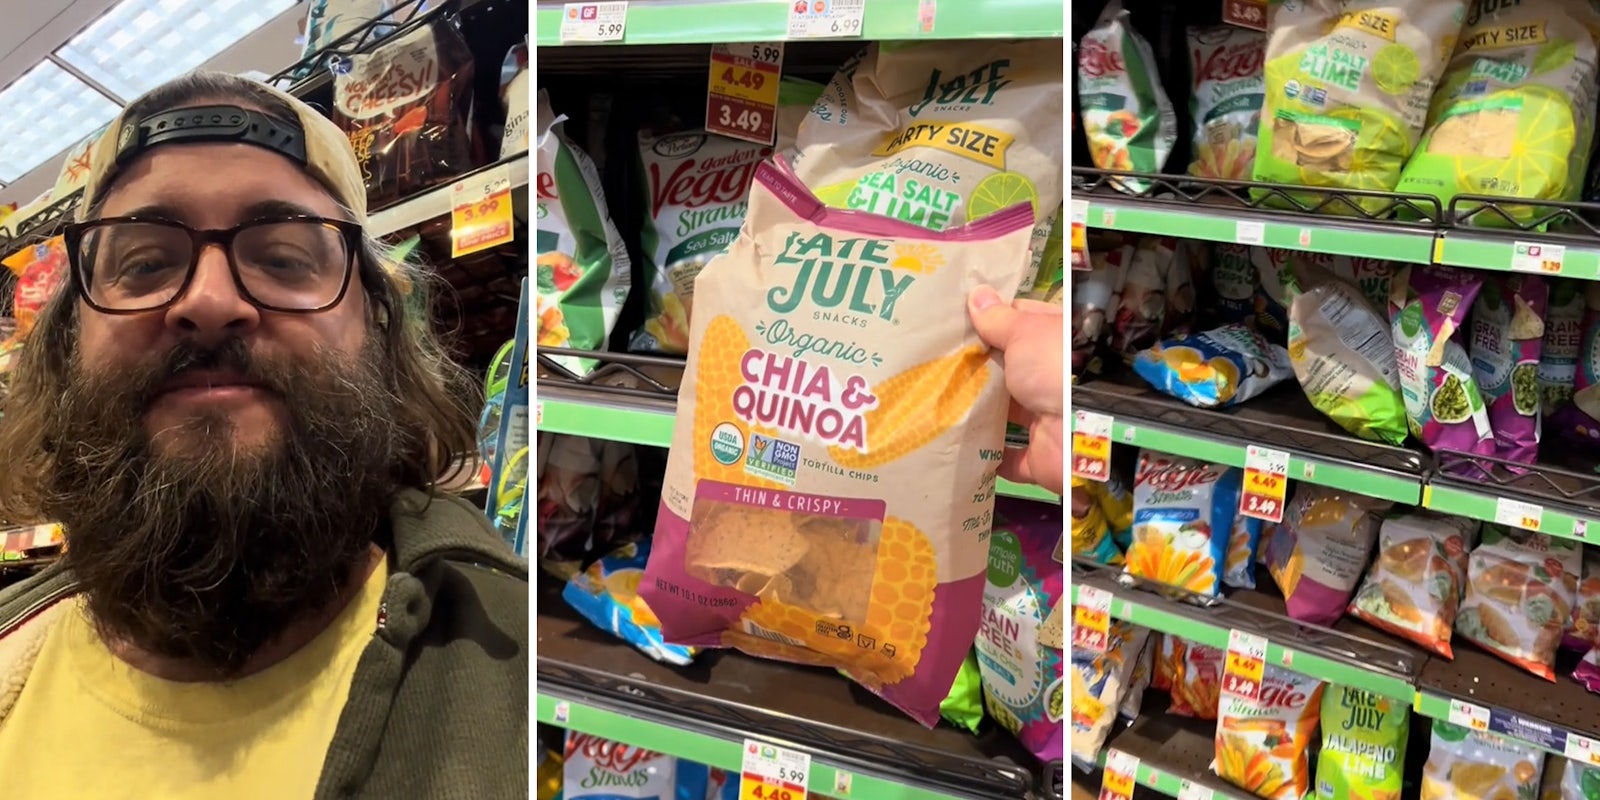 Man accuses companies of ‘gaslighting’ customers over shrinkflation after trying to buy tortilla chip bag